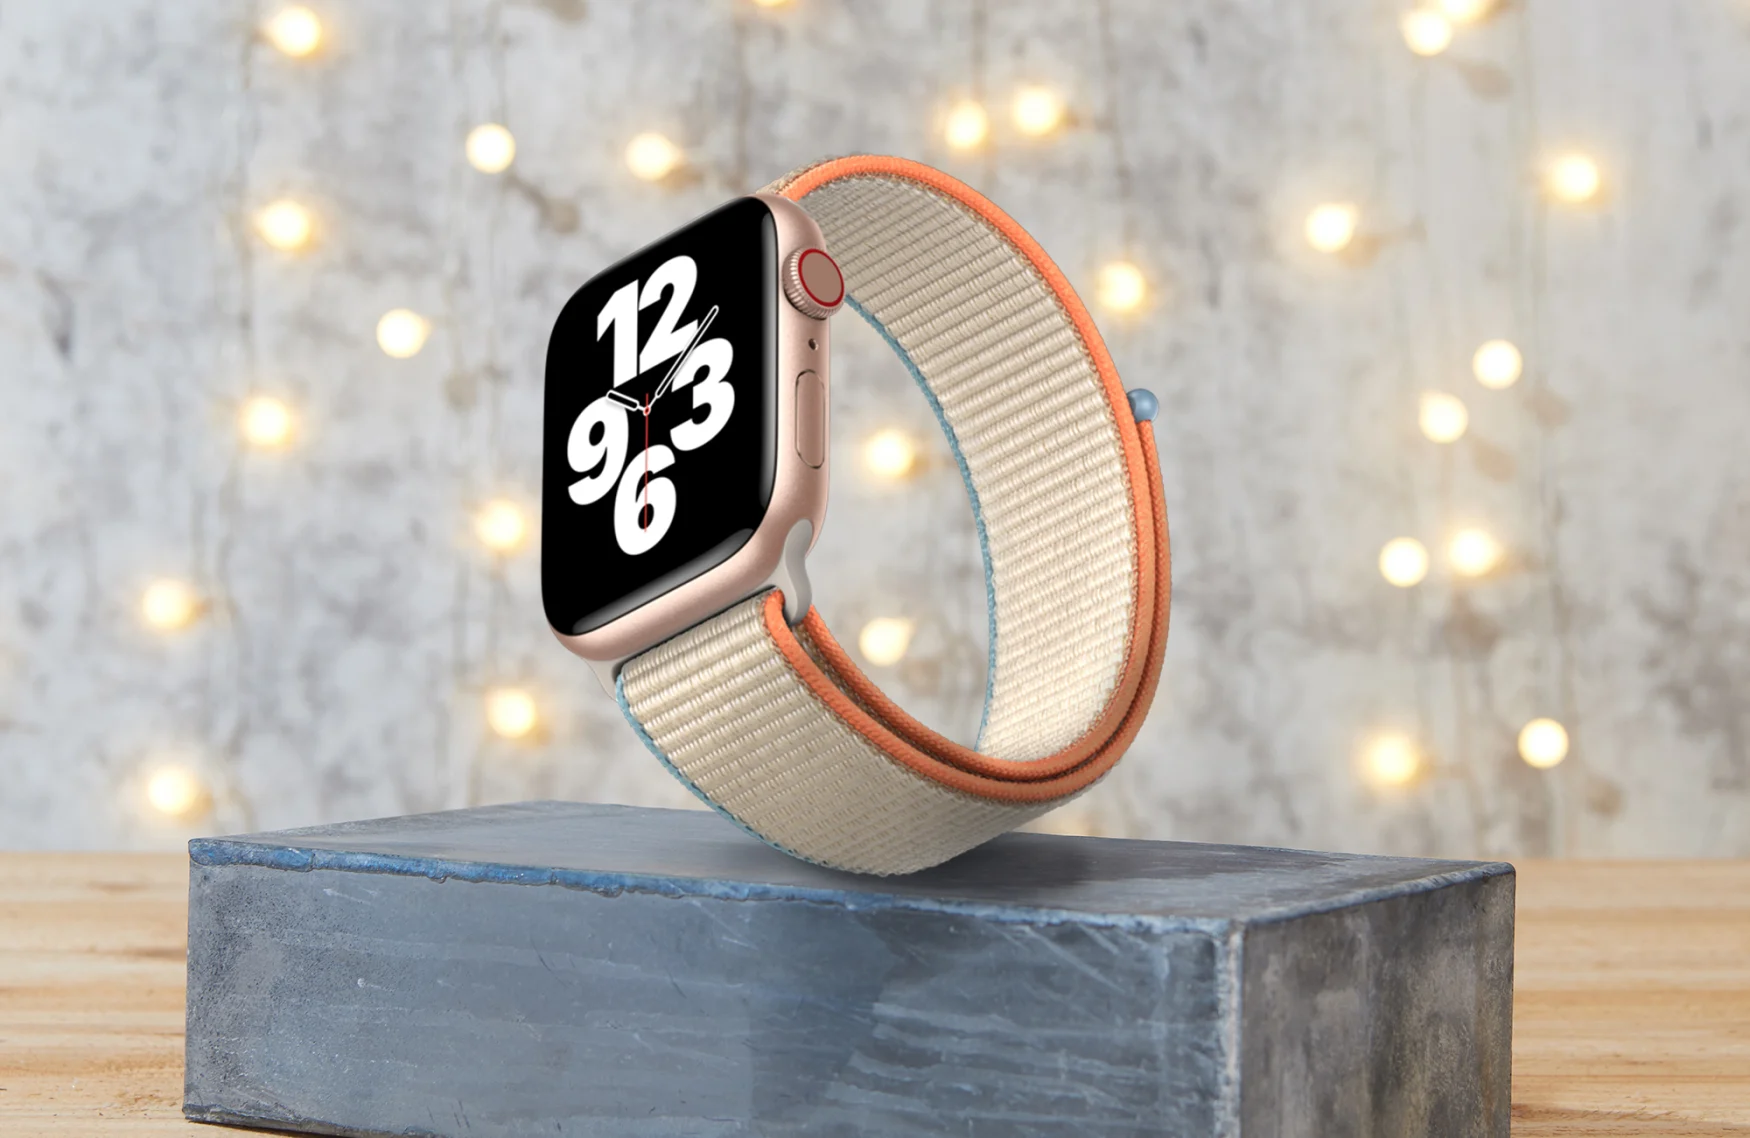 Apple Watch SE for the Engadget 2021 Holiday Gift Guide.
